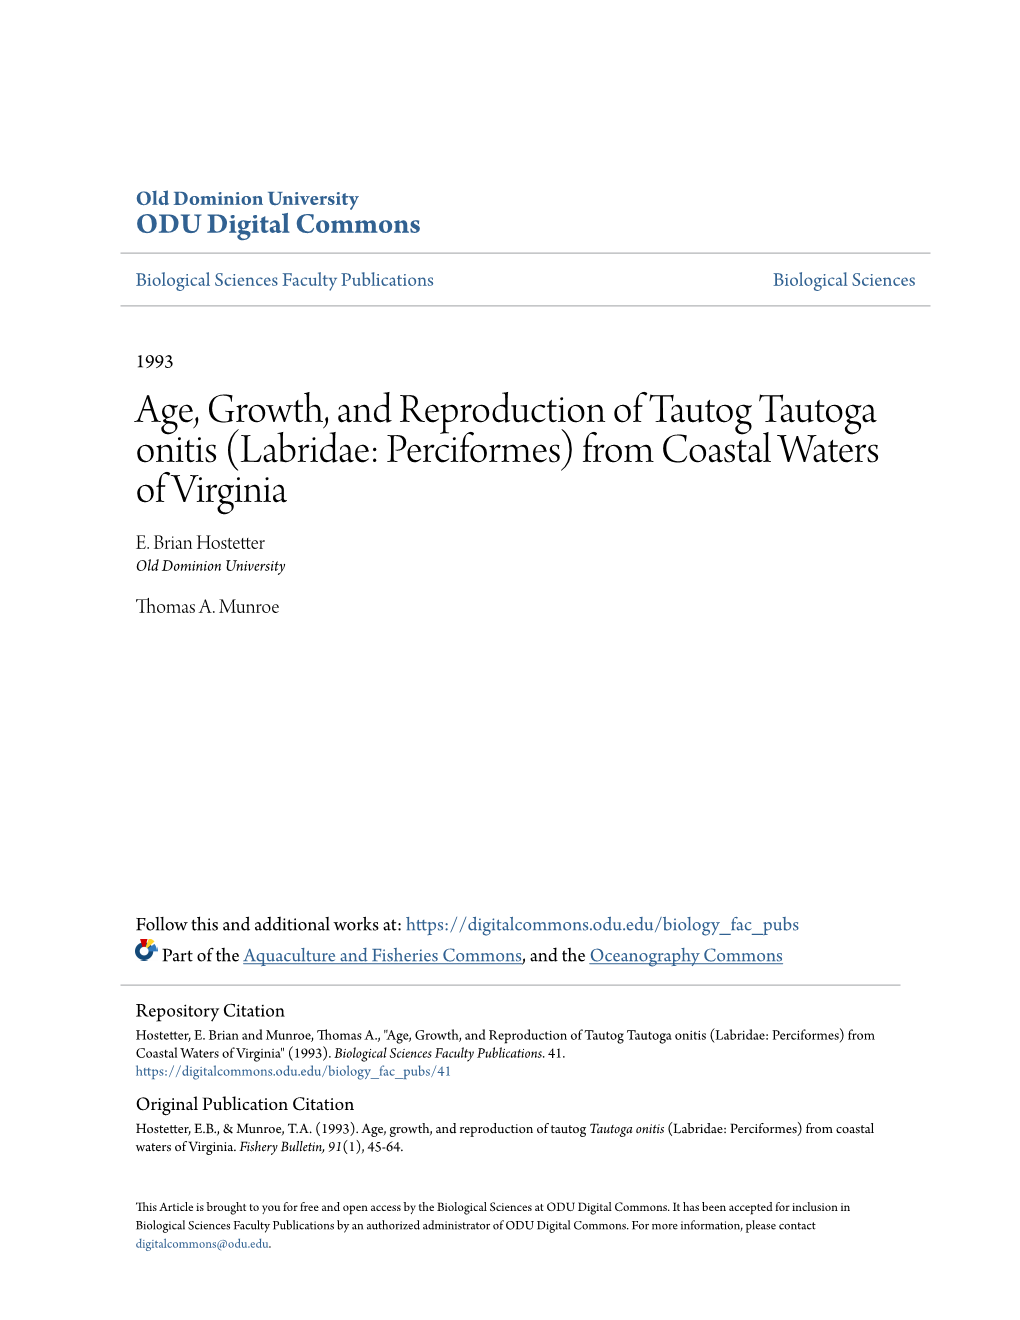 Age, Growth, and Reproduction of Tautog Tautoga Onitis (Labridae: Perciformes) from Coastal Waters of Virginia E